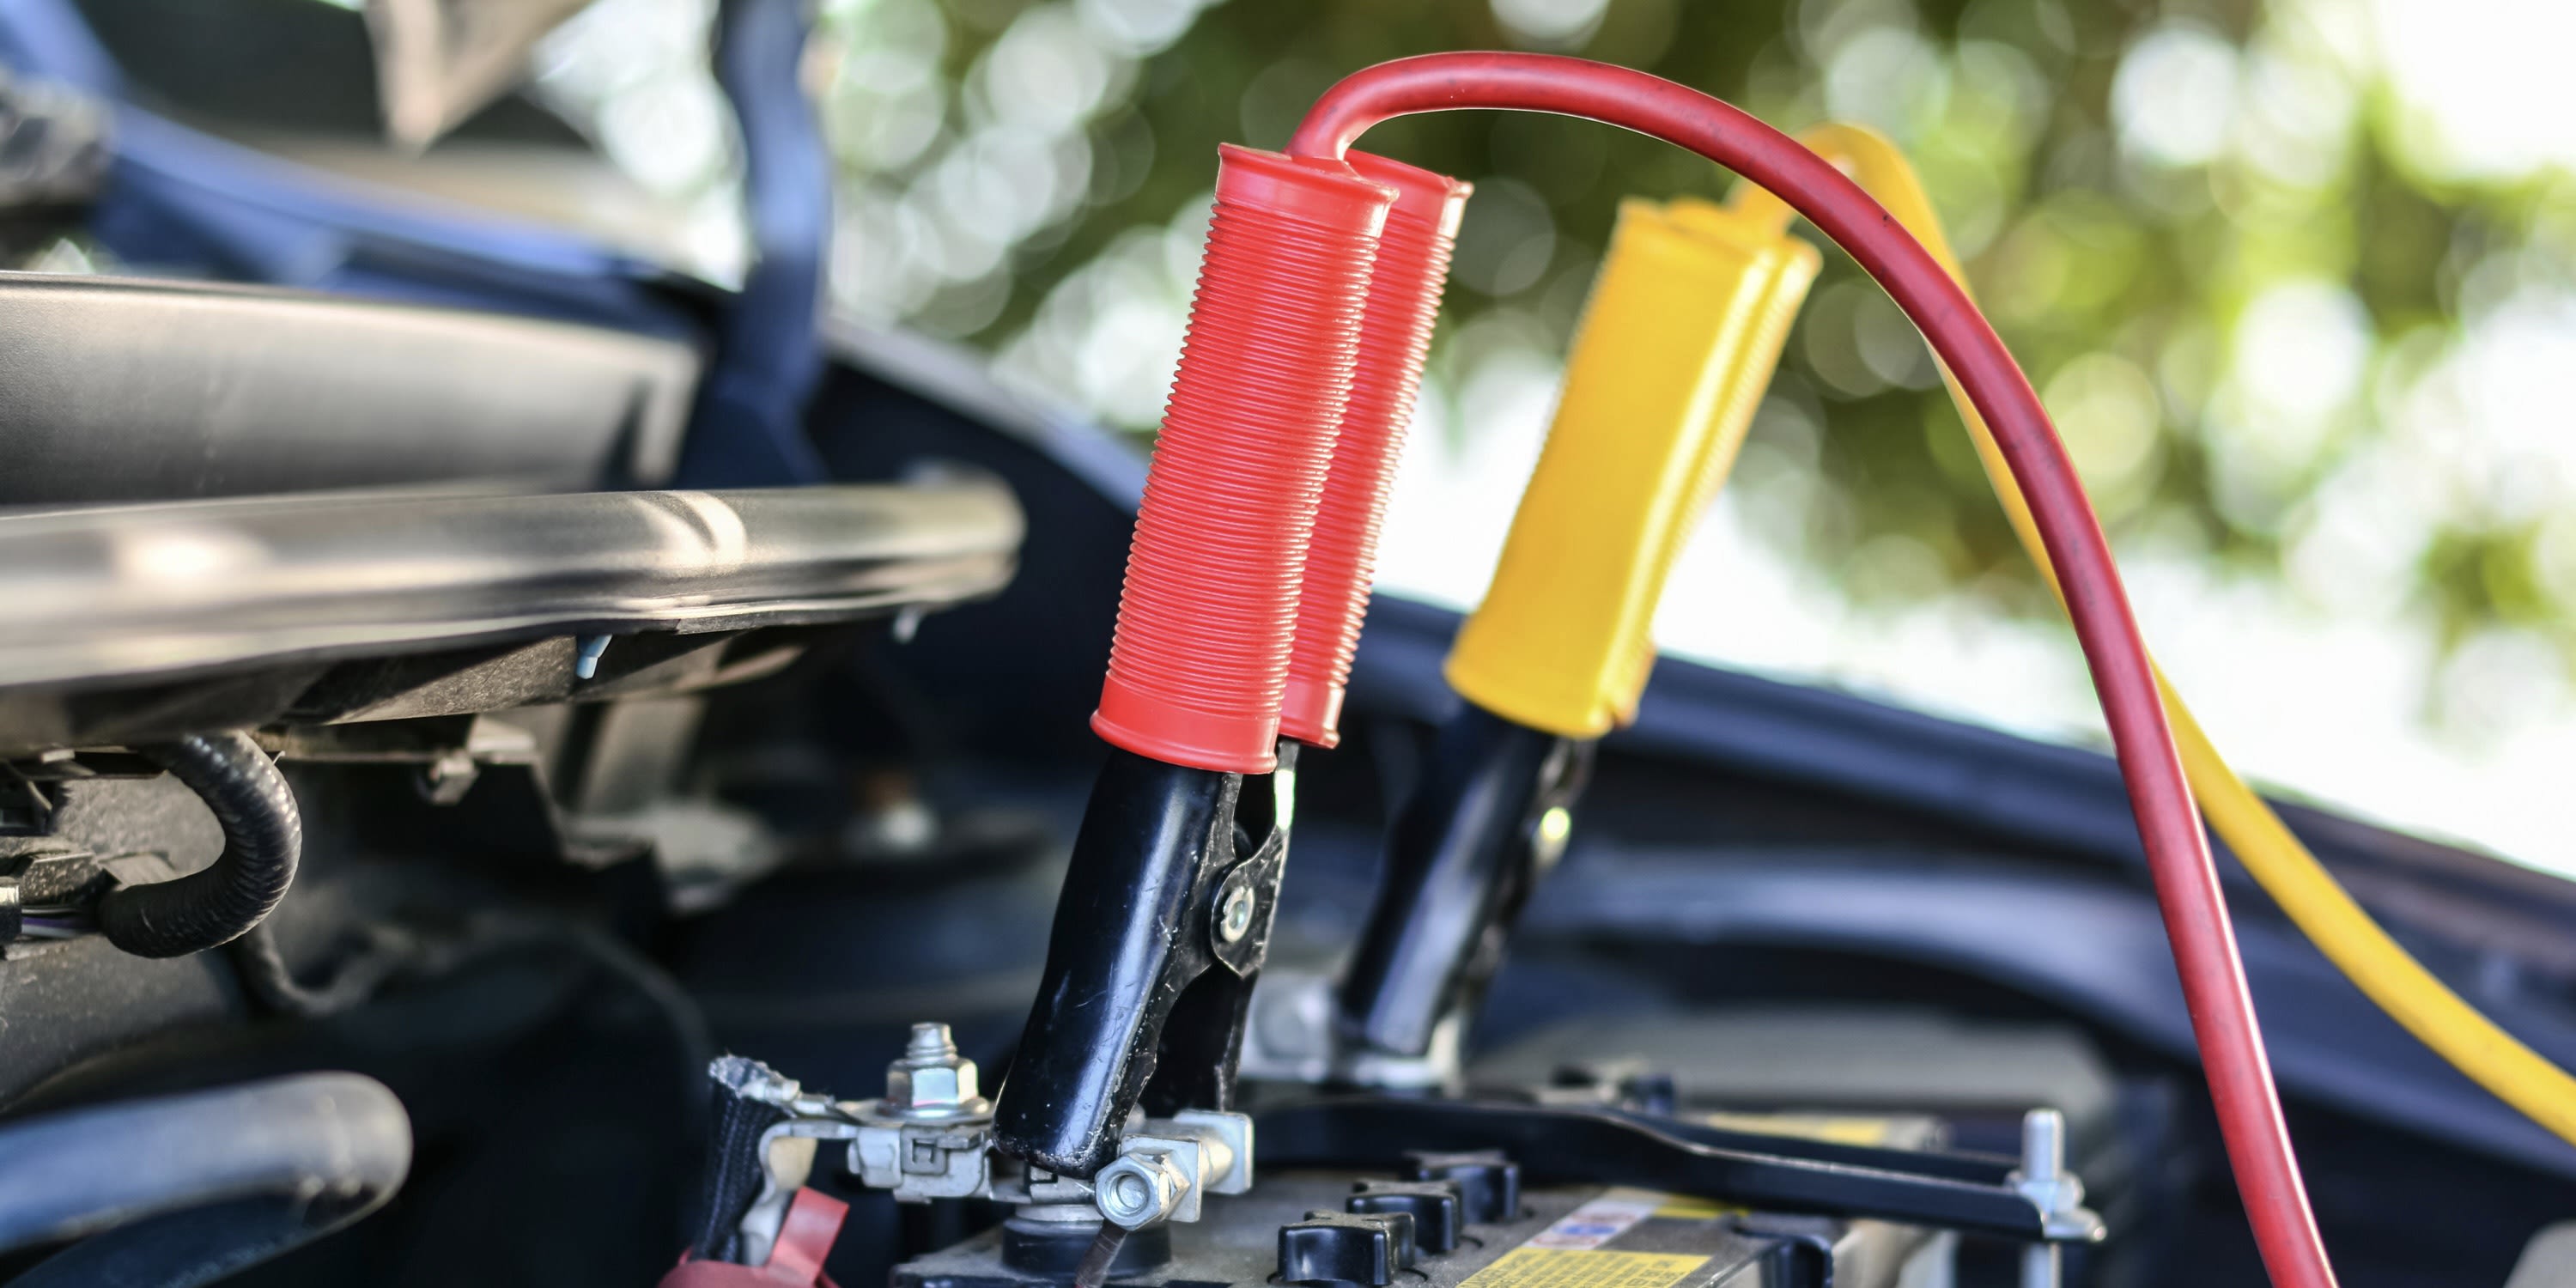 How to Jump Start a Car Using Jump Leads